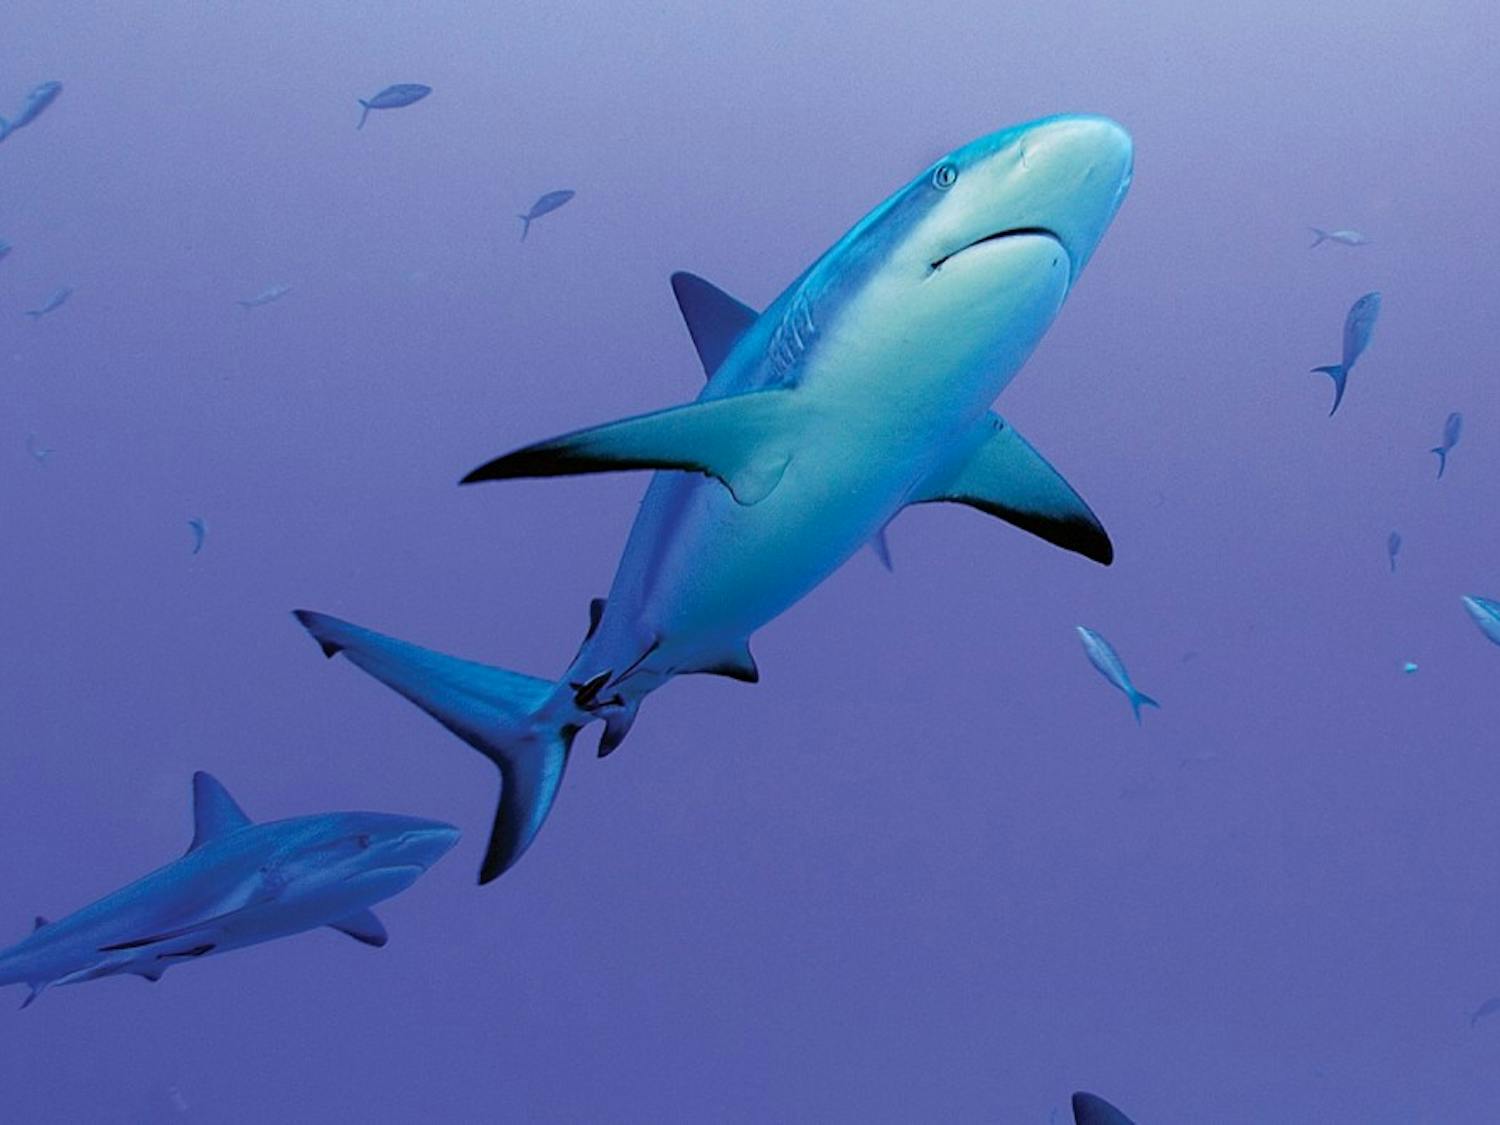 Neil Hammerschlag captured a high-definition photo of reef sharks swimming with fish. (Photo courtesy of Neil Hammerschlag)